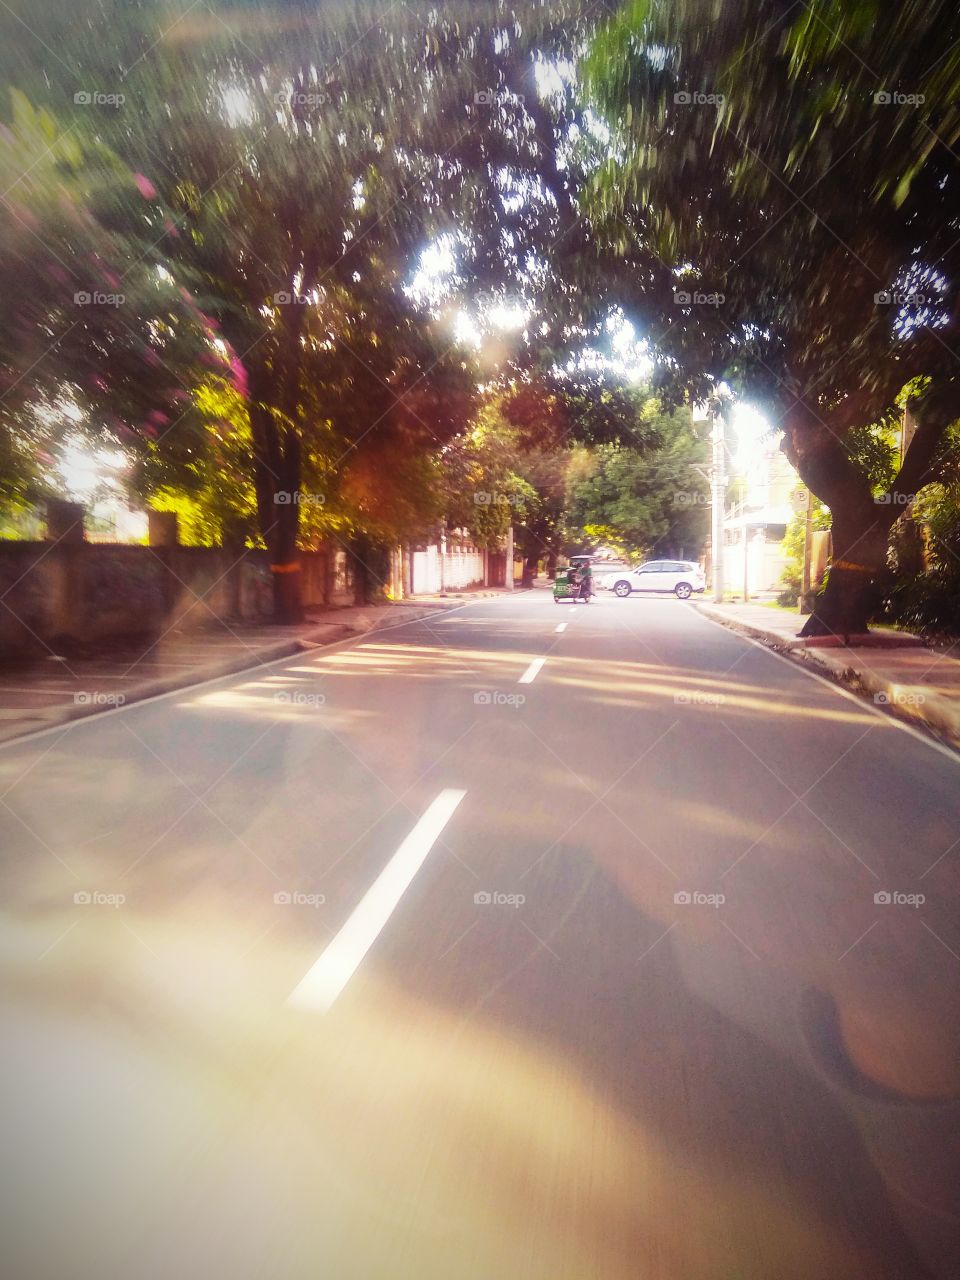 It's sunny but the road is shaded by trees. I like that warm, sunny, shady and classic feeling. I like riding this car with comfortable seats at the back where I could take pictures like this. The reflection from the window added beauty to this.